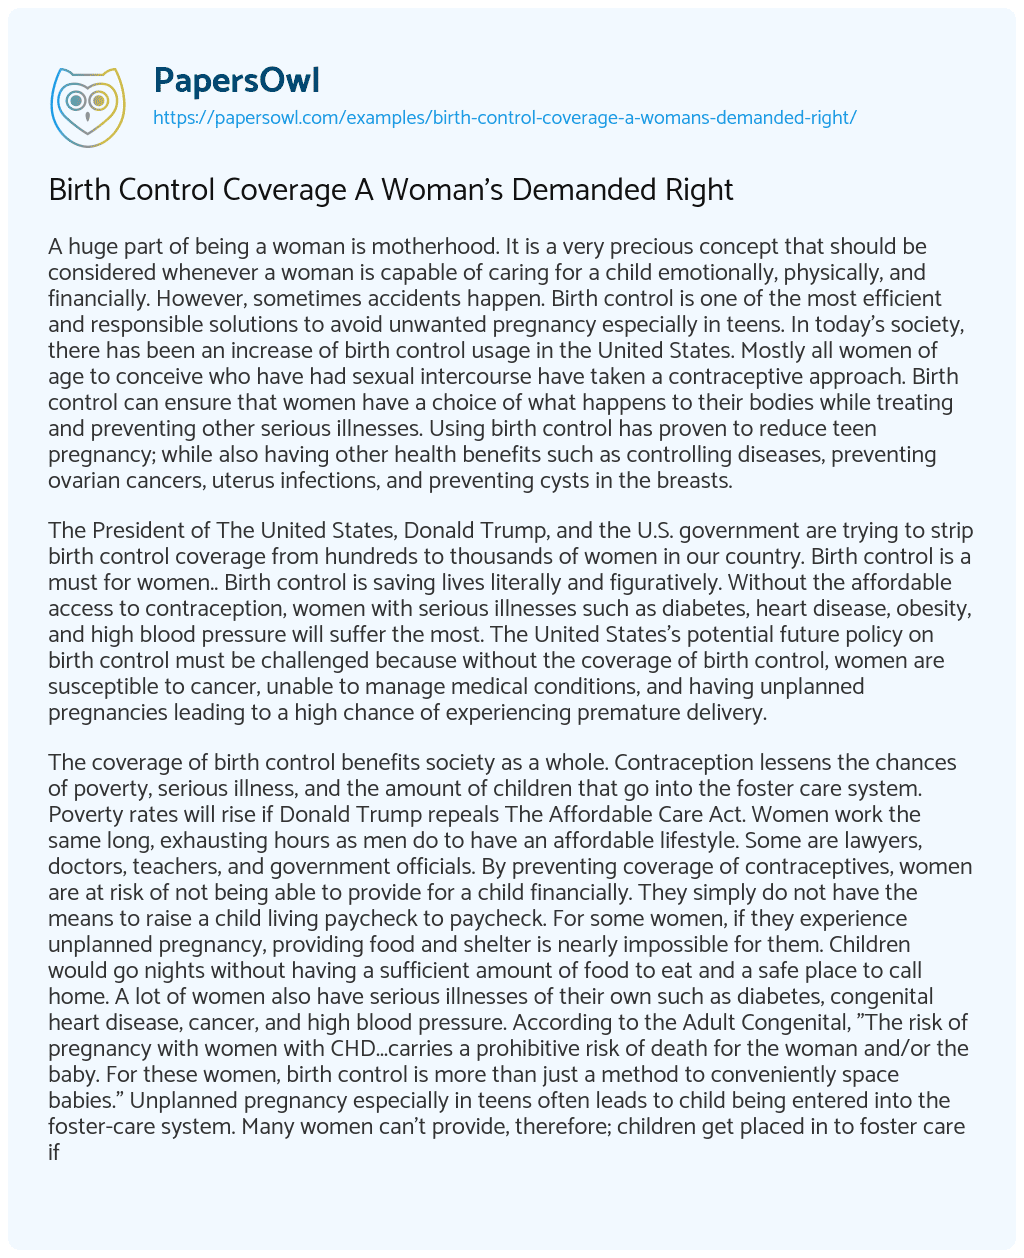 Essay on Birth Control Coverage a Woman’s Demanded Right